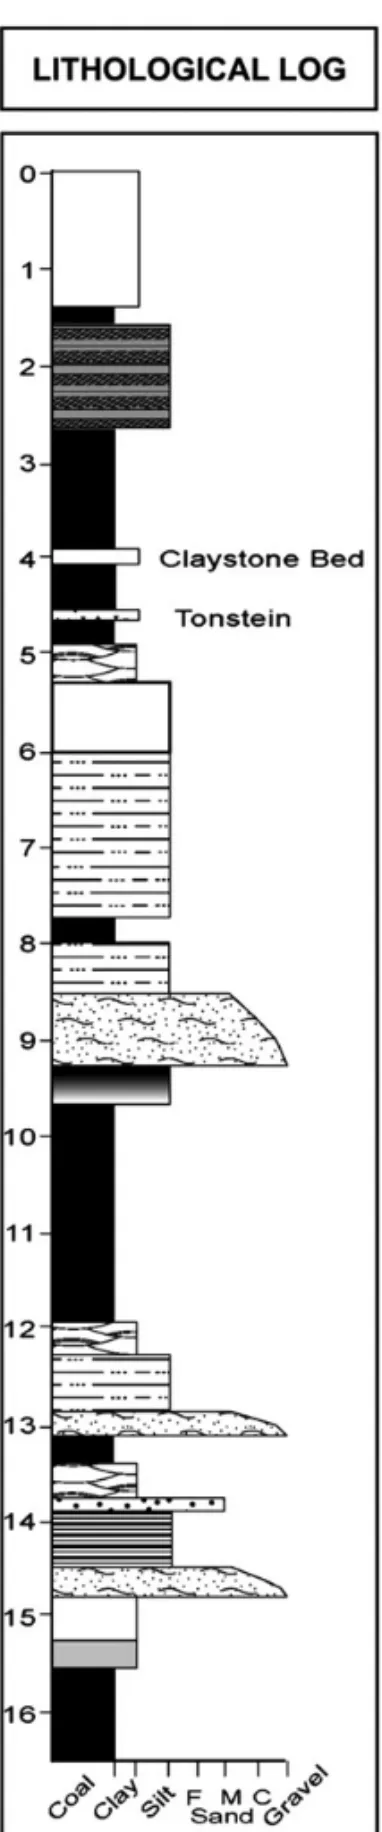 Fig. 2 – Lithological log of the Faxinal Coalfield (adapted from Guerra-Sommer et al. 2008c, fig